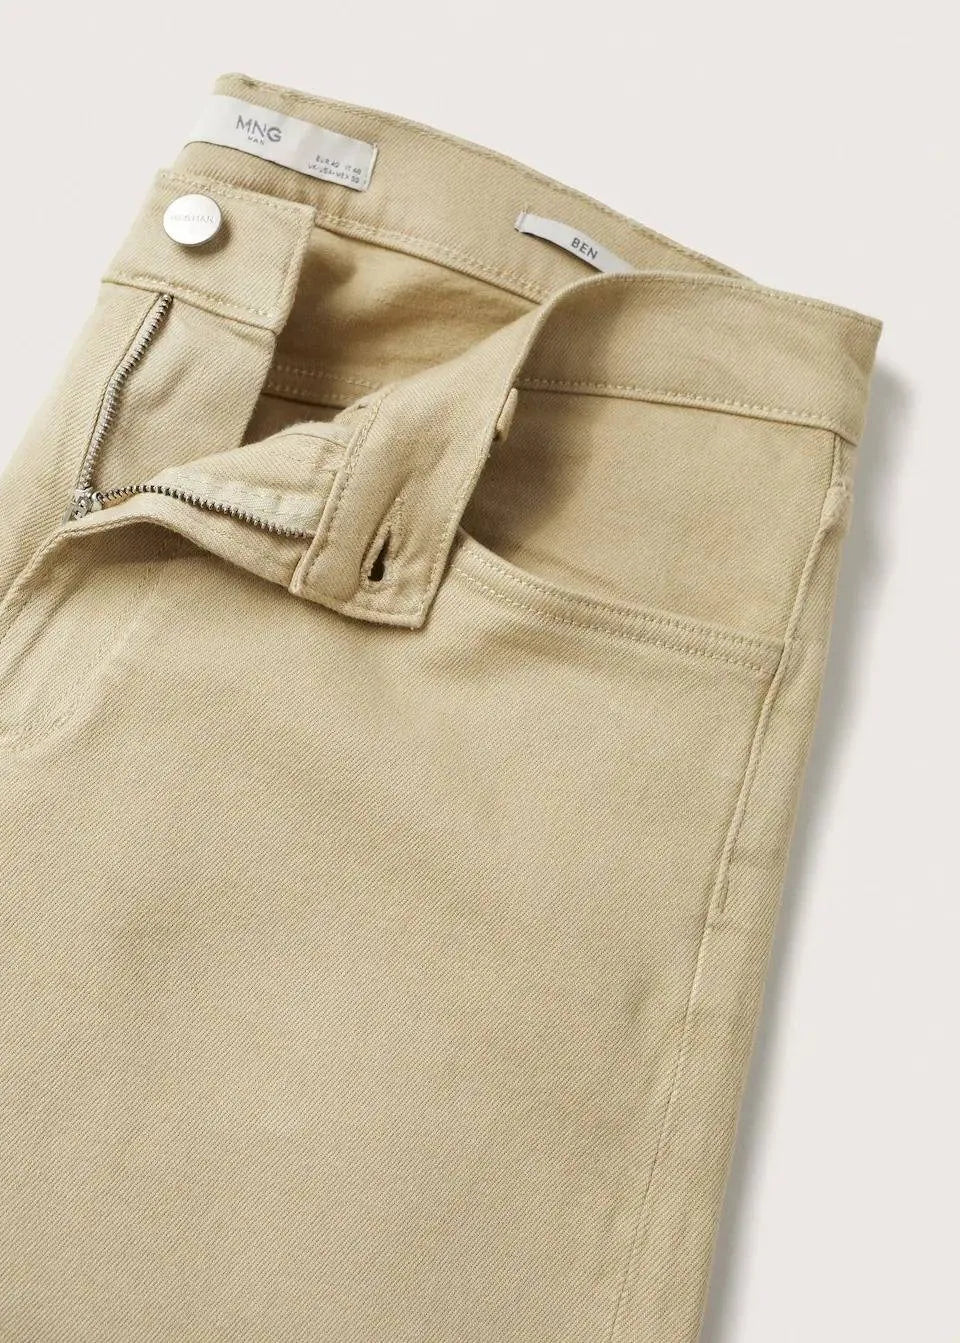 Modern Beige Jeans: Mango's tapered, cropped fit in versatile beige (mention size if relevant).Tapered design for a defined silhouette, cropped length for a modern touch.Consider mentioning any specific details like the fabric composition 